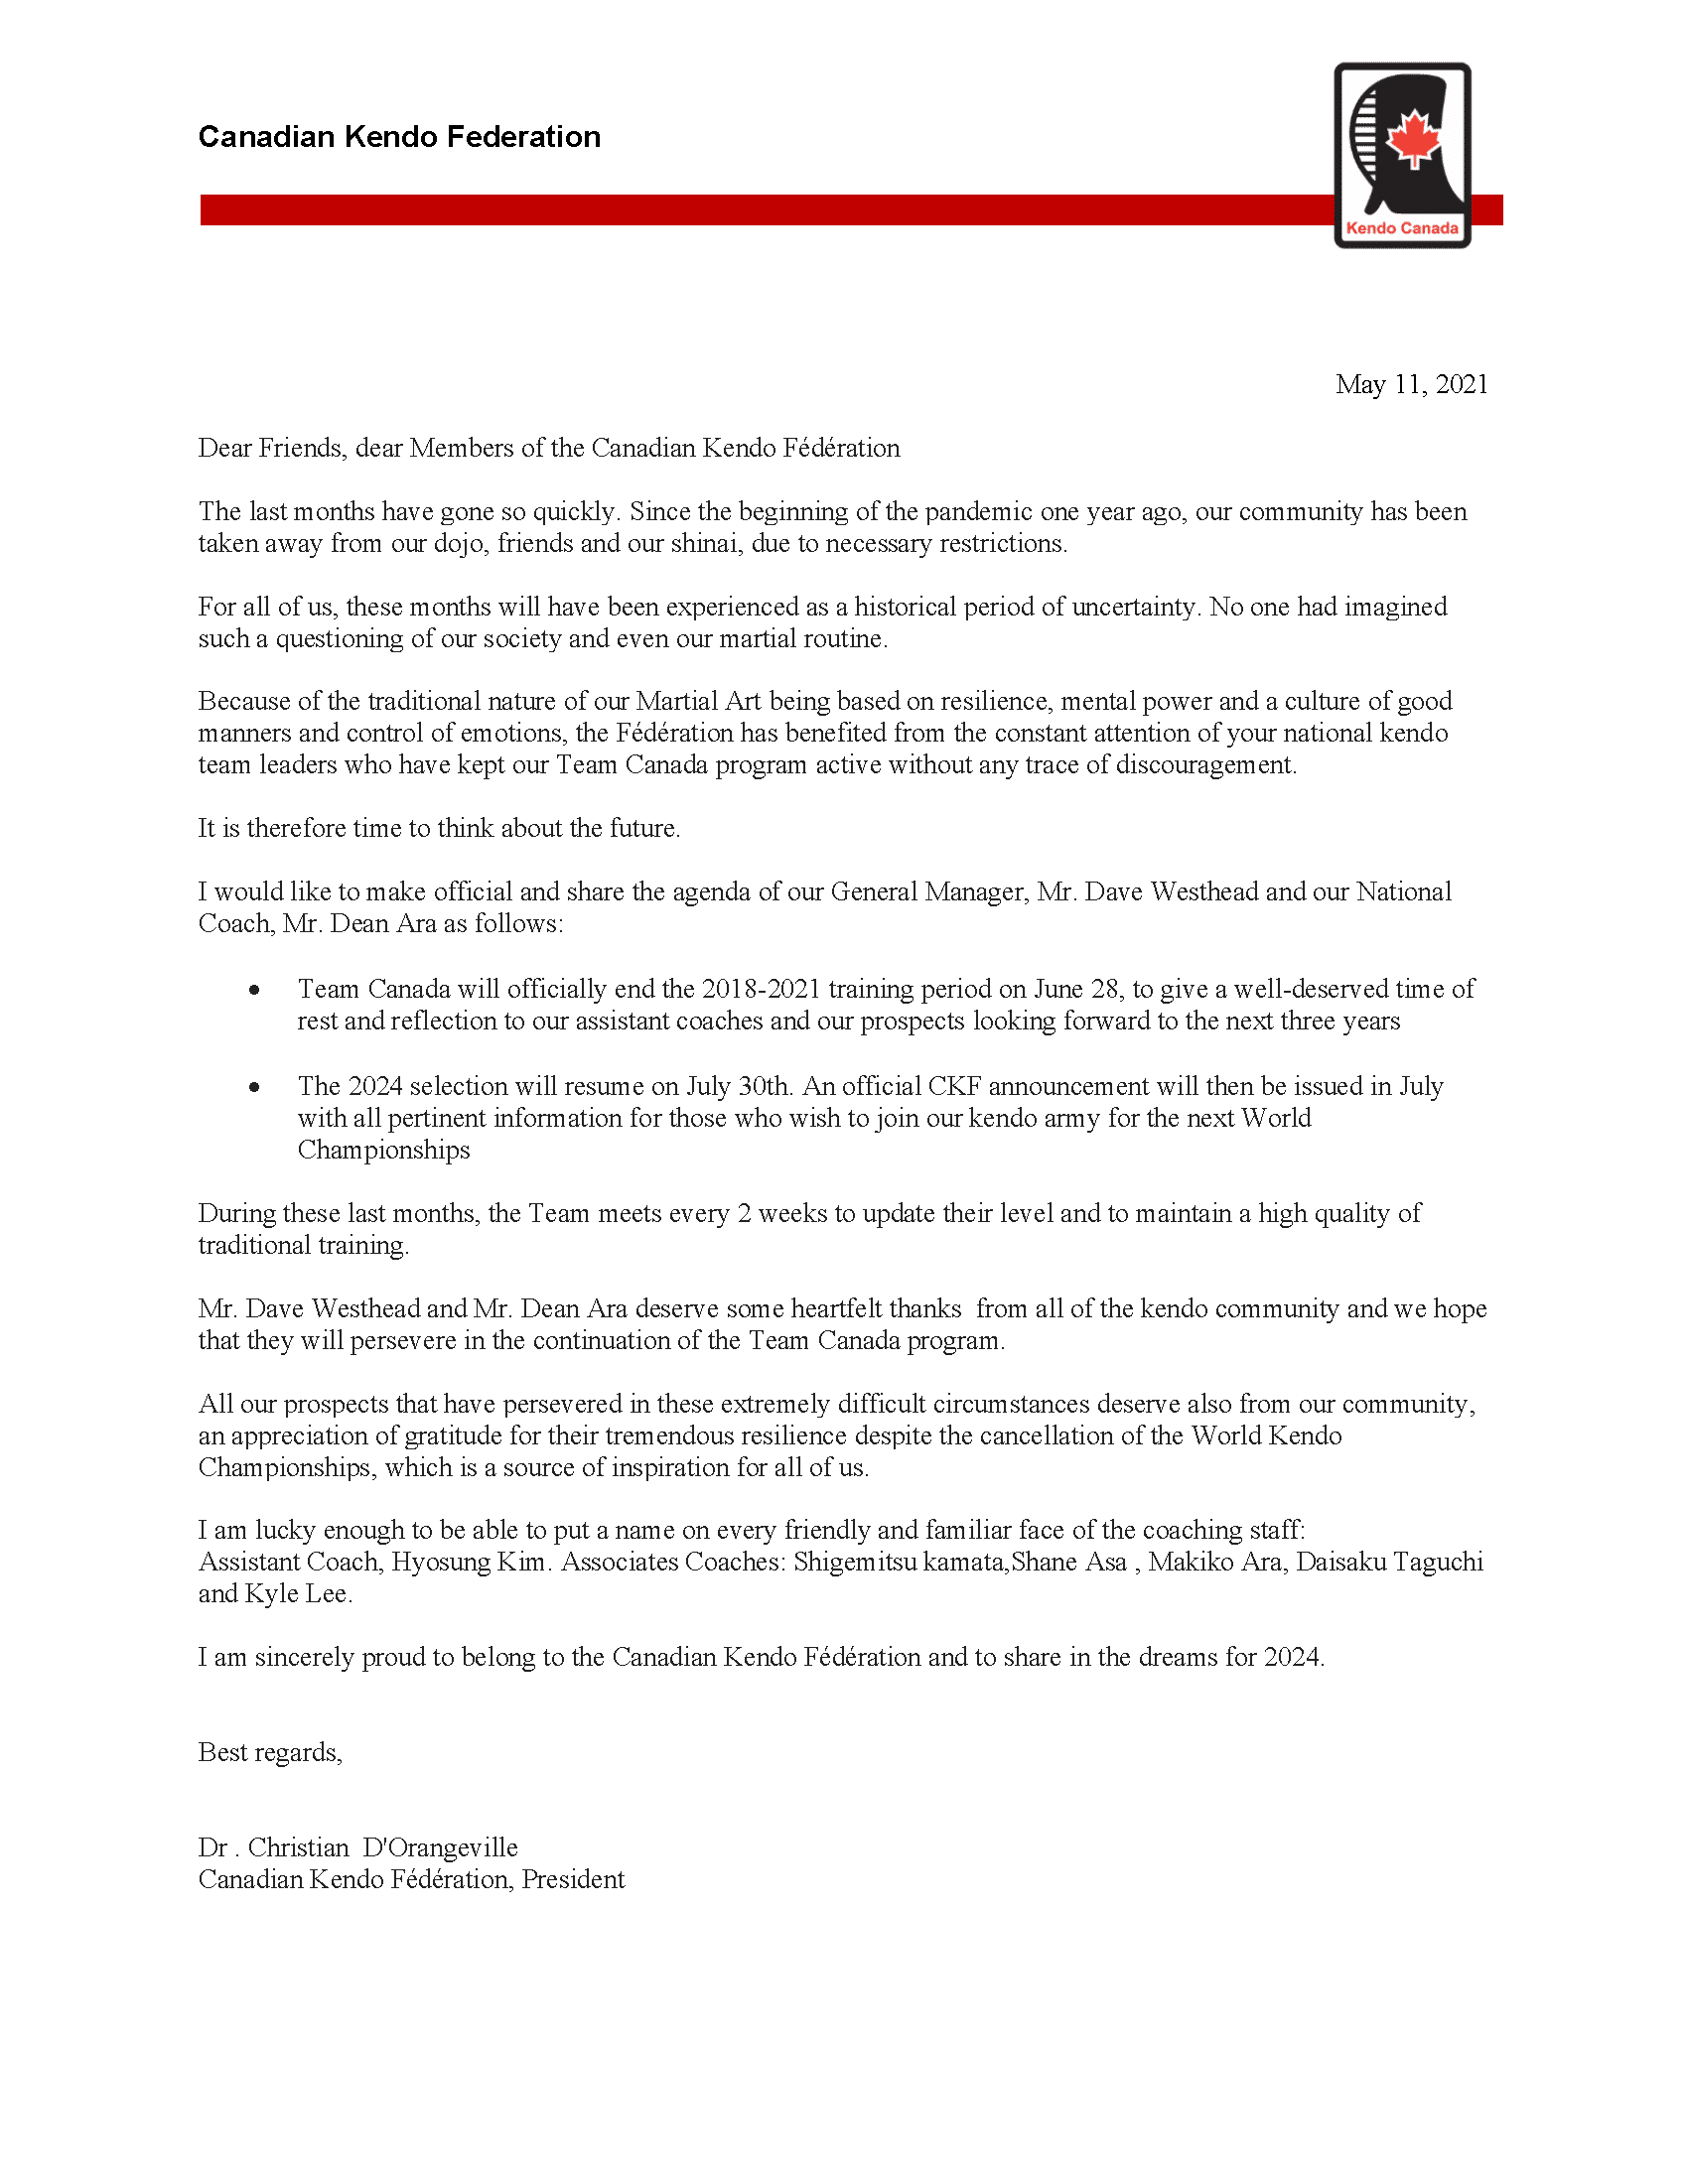 2021 Kendo Team Canada Official Notification of Completion [English]